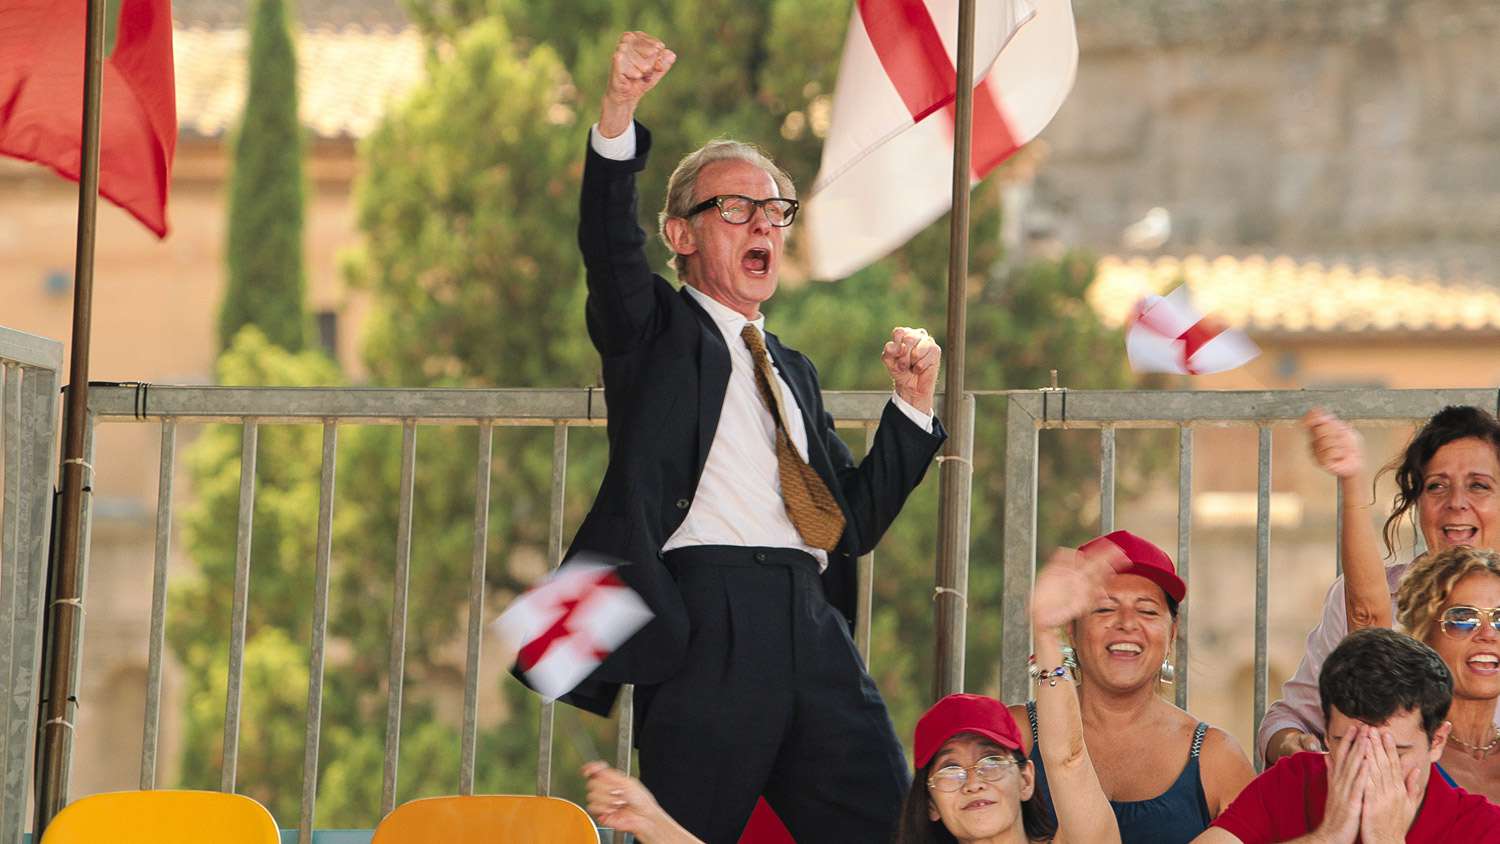 Bill Nighy Goes for Gold at the Homeless World Cup in The Beautiful Game Trailer